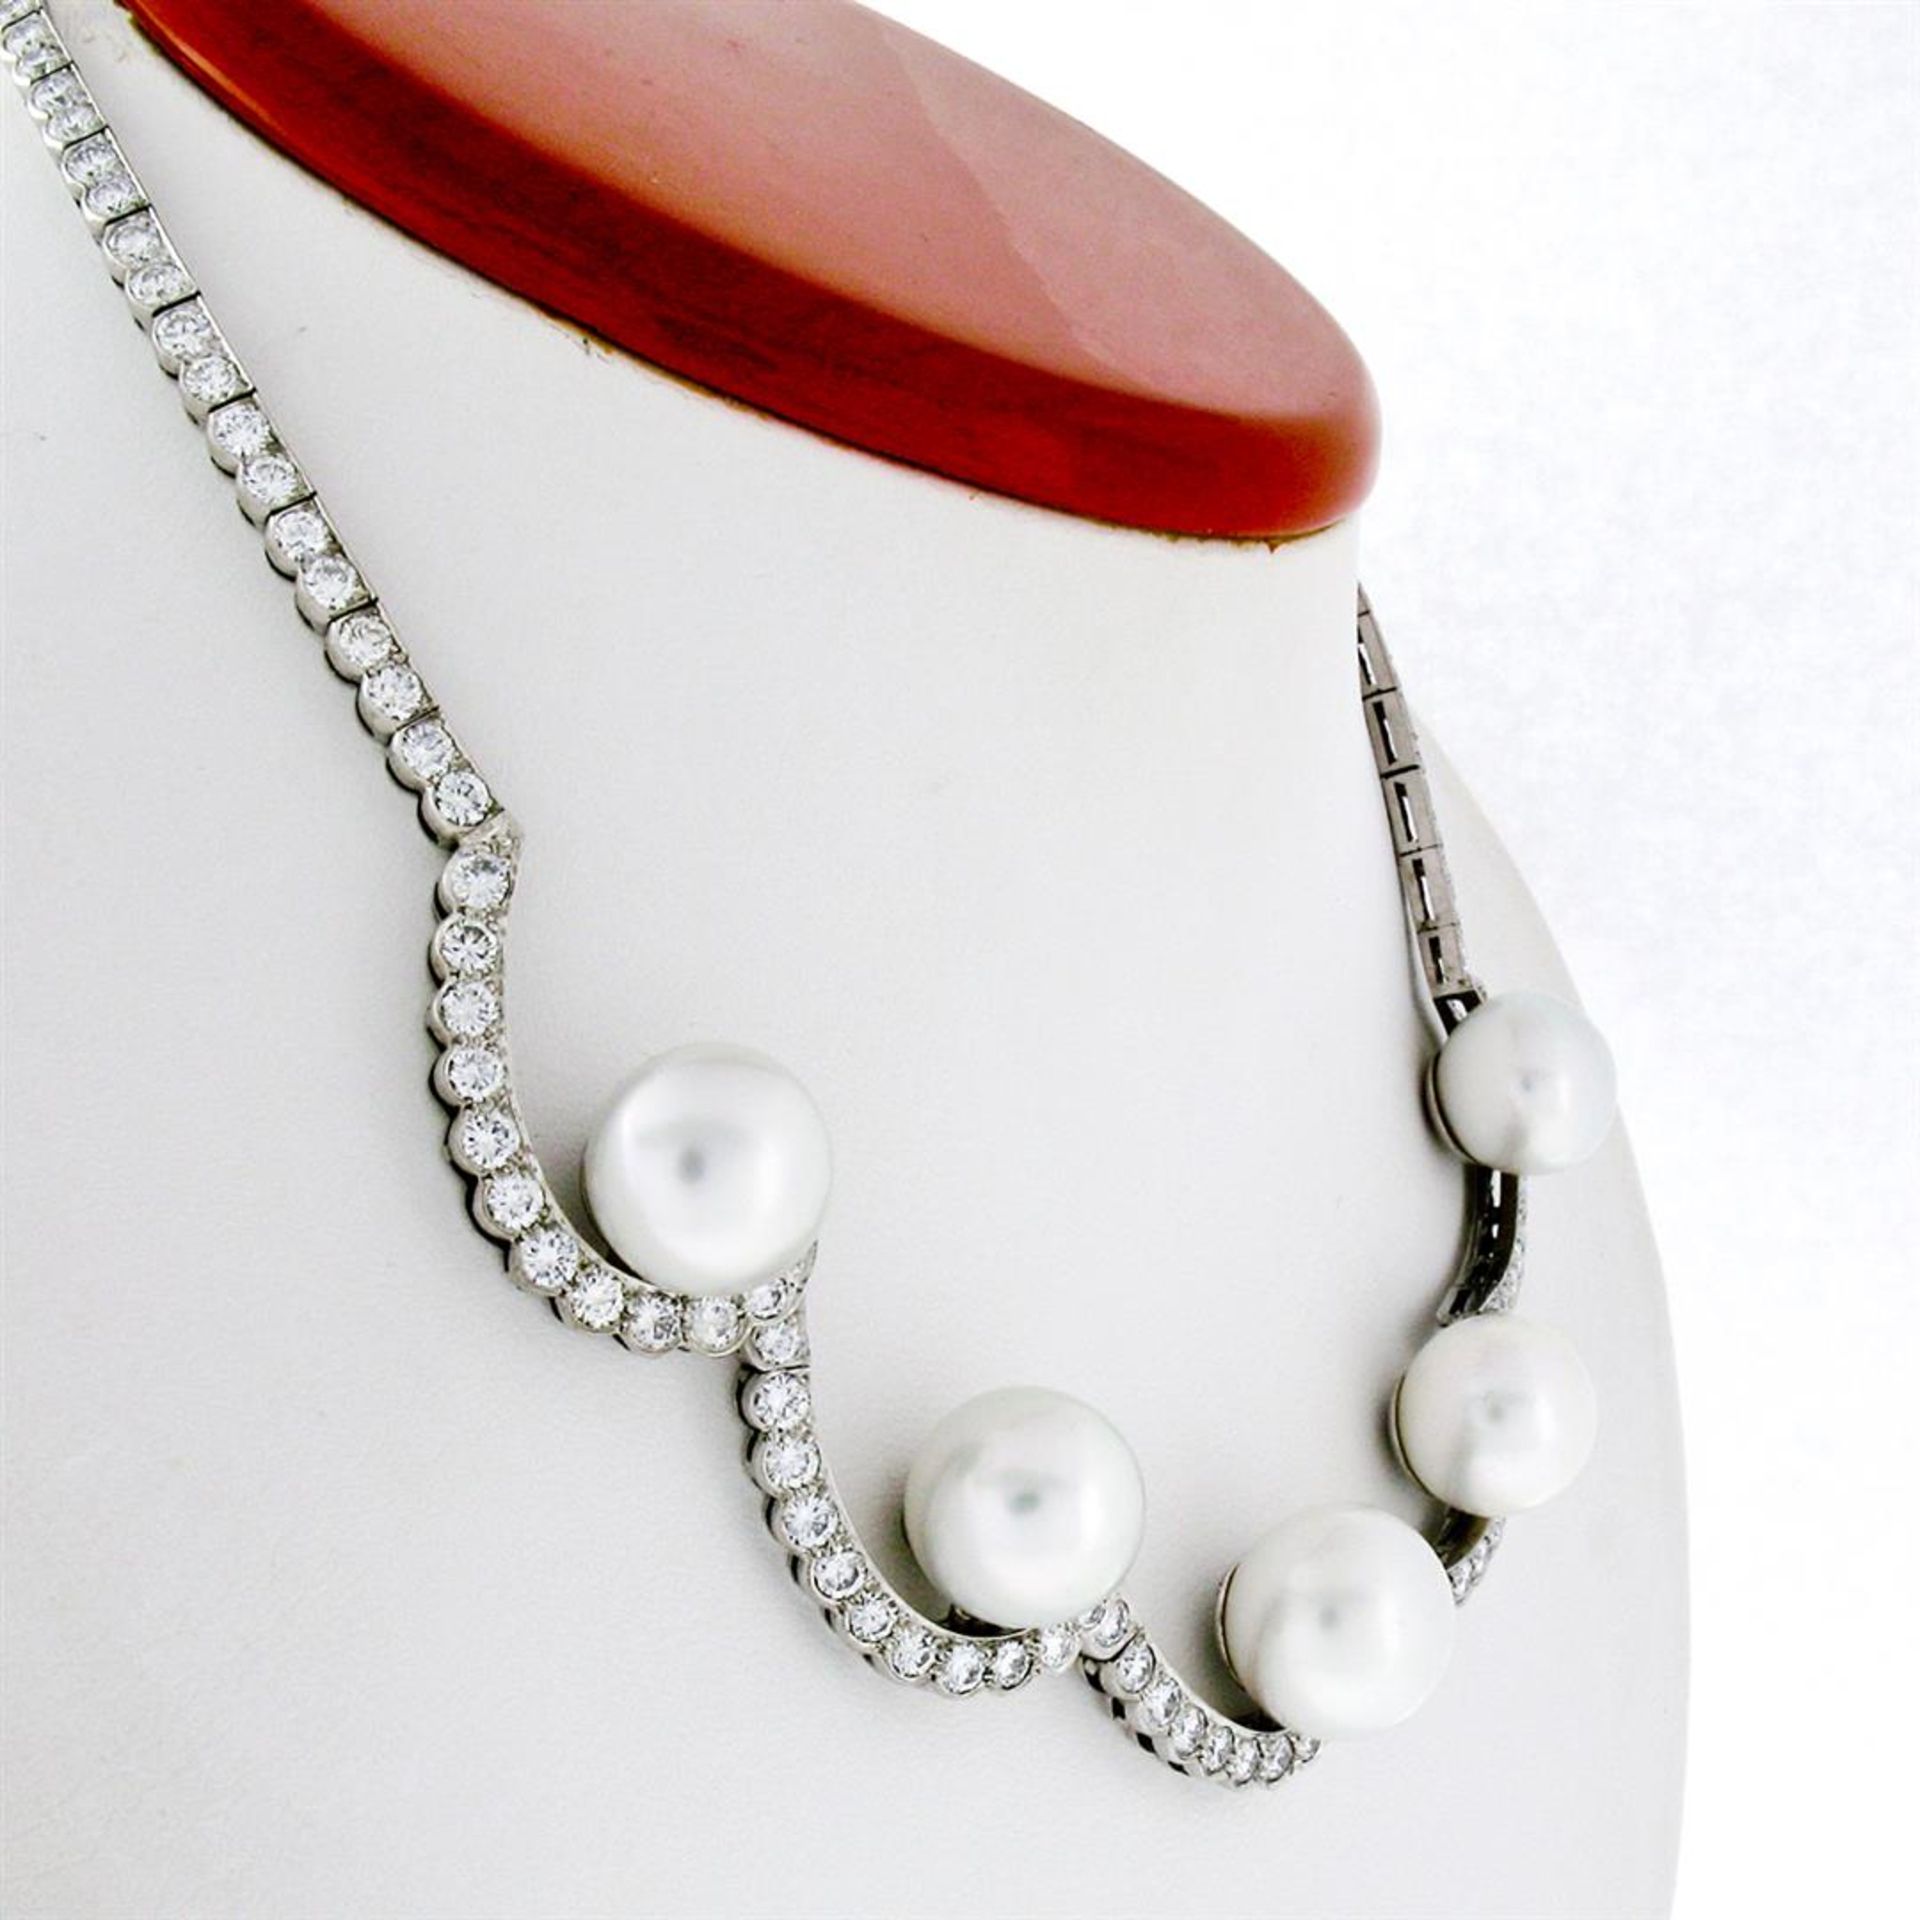 Platinum 10.25ctw Diamond & Floating South Sea Pearl Statement Necklace - Image 3 of 9